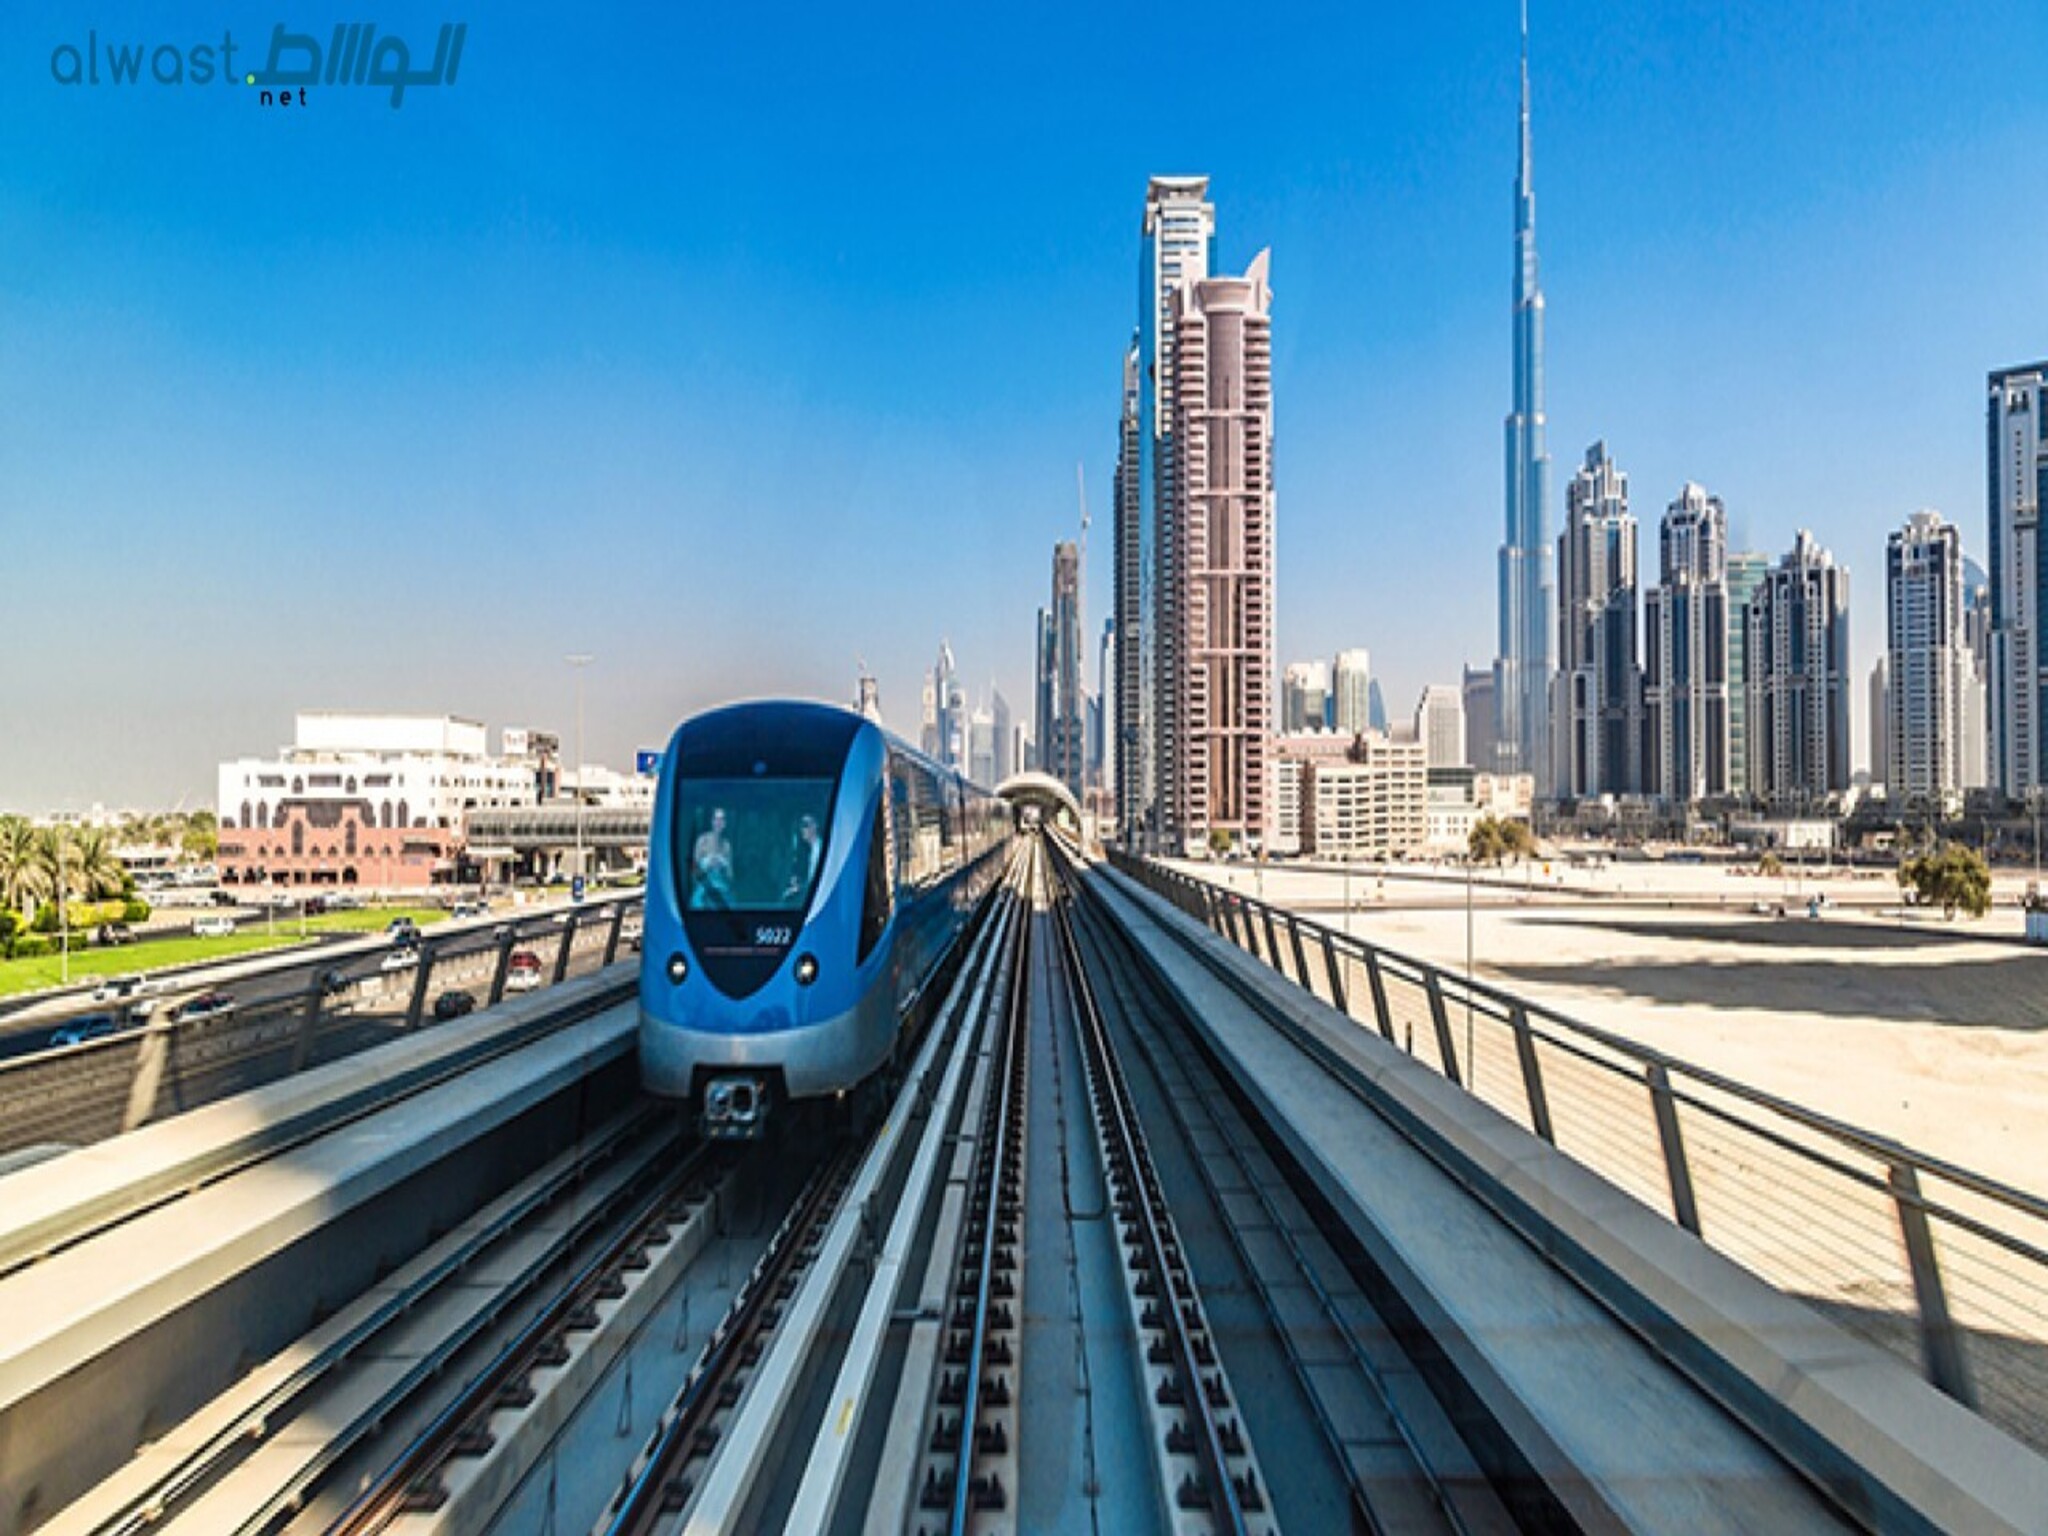 UAE: Reopening Date Set for Four Dubai Metro Stations Closed Due to Storm